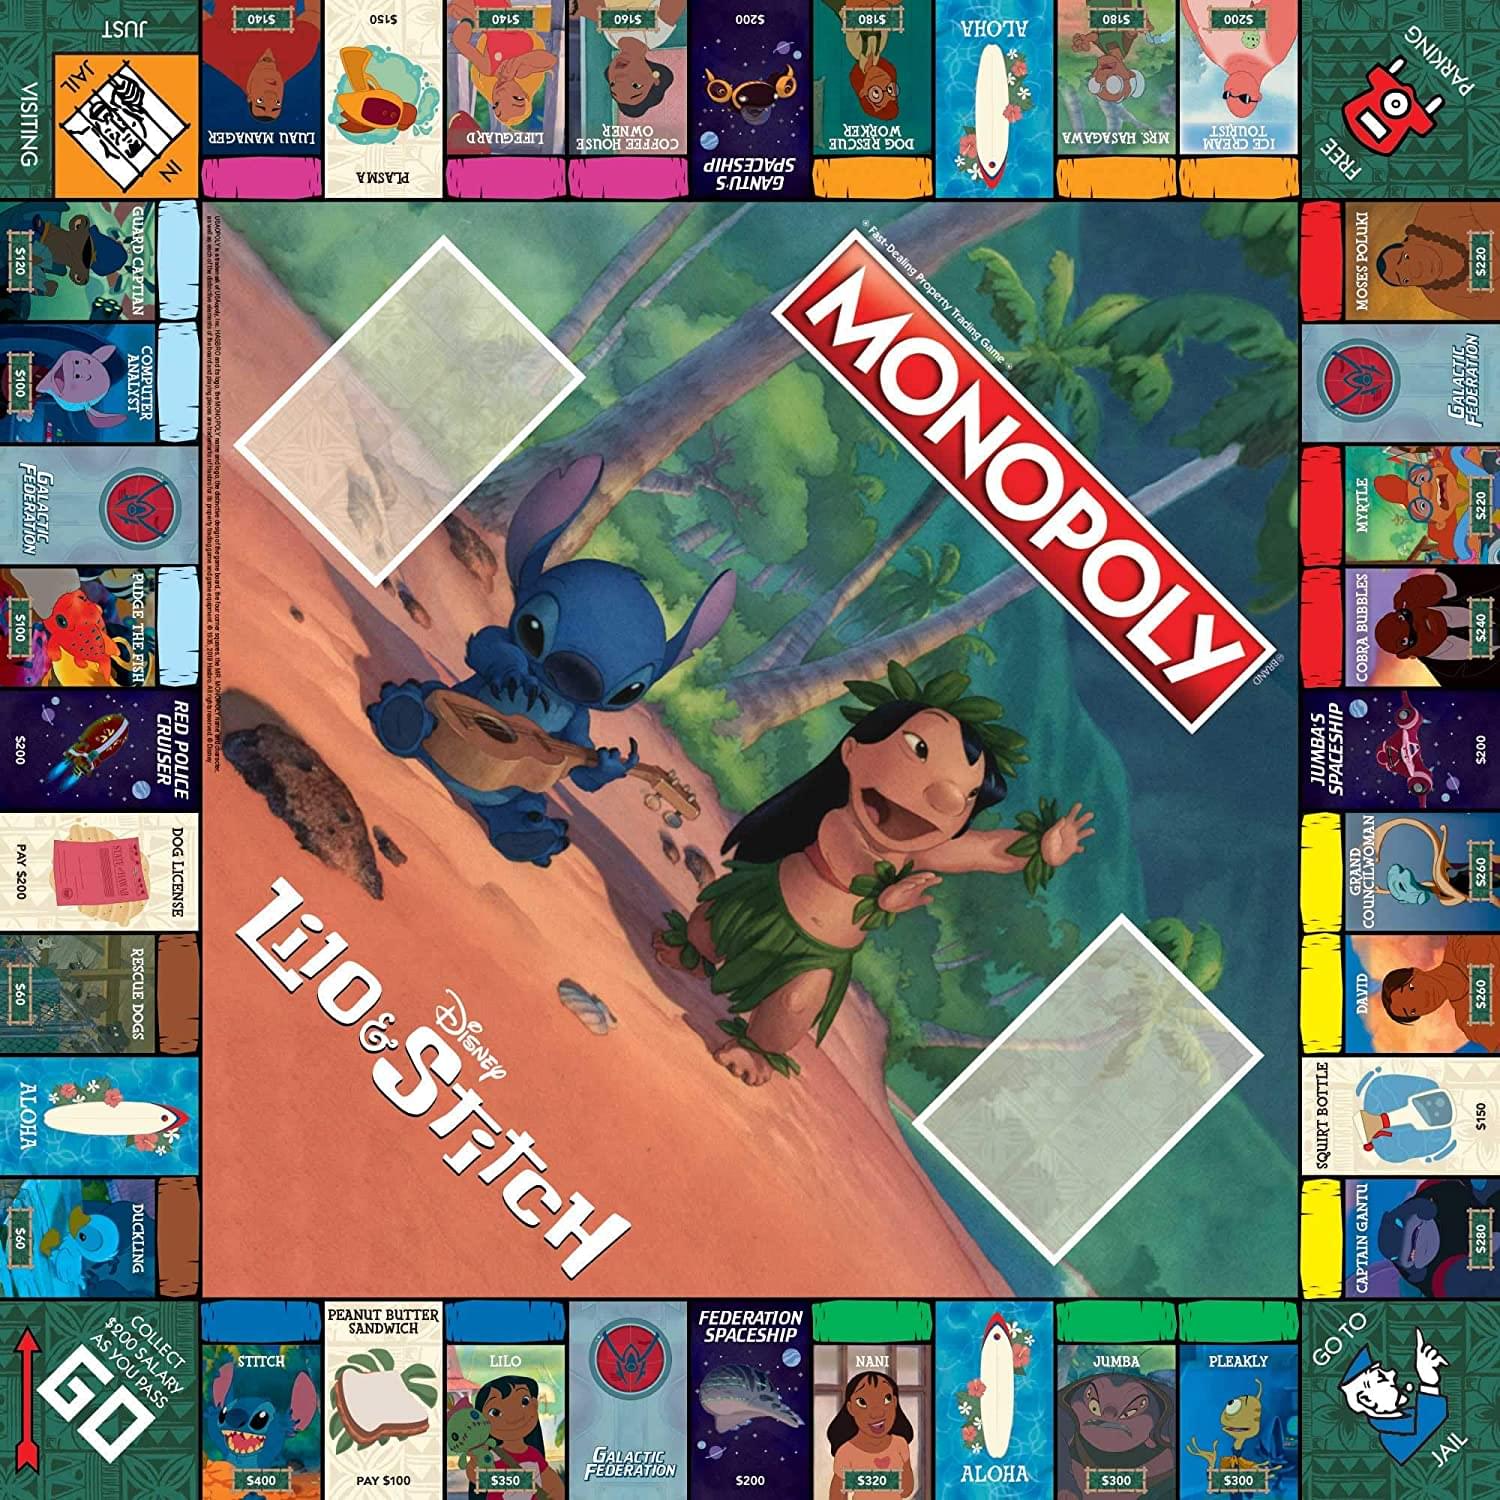 Disney Lilo & Stitch Monopoly Board Game | For 2-6 Players